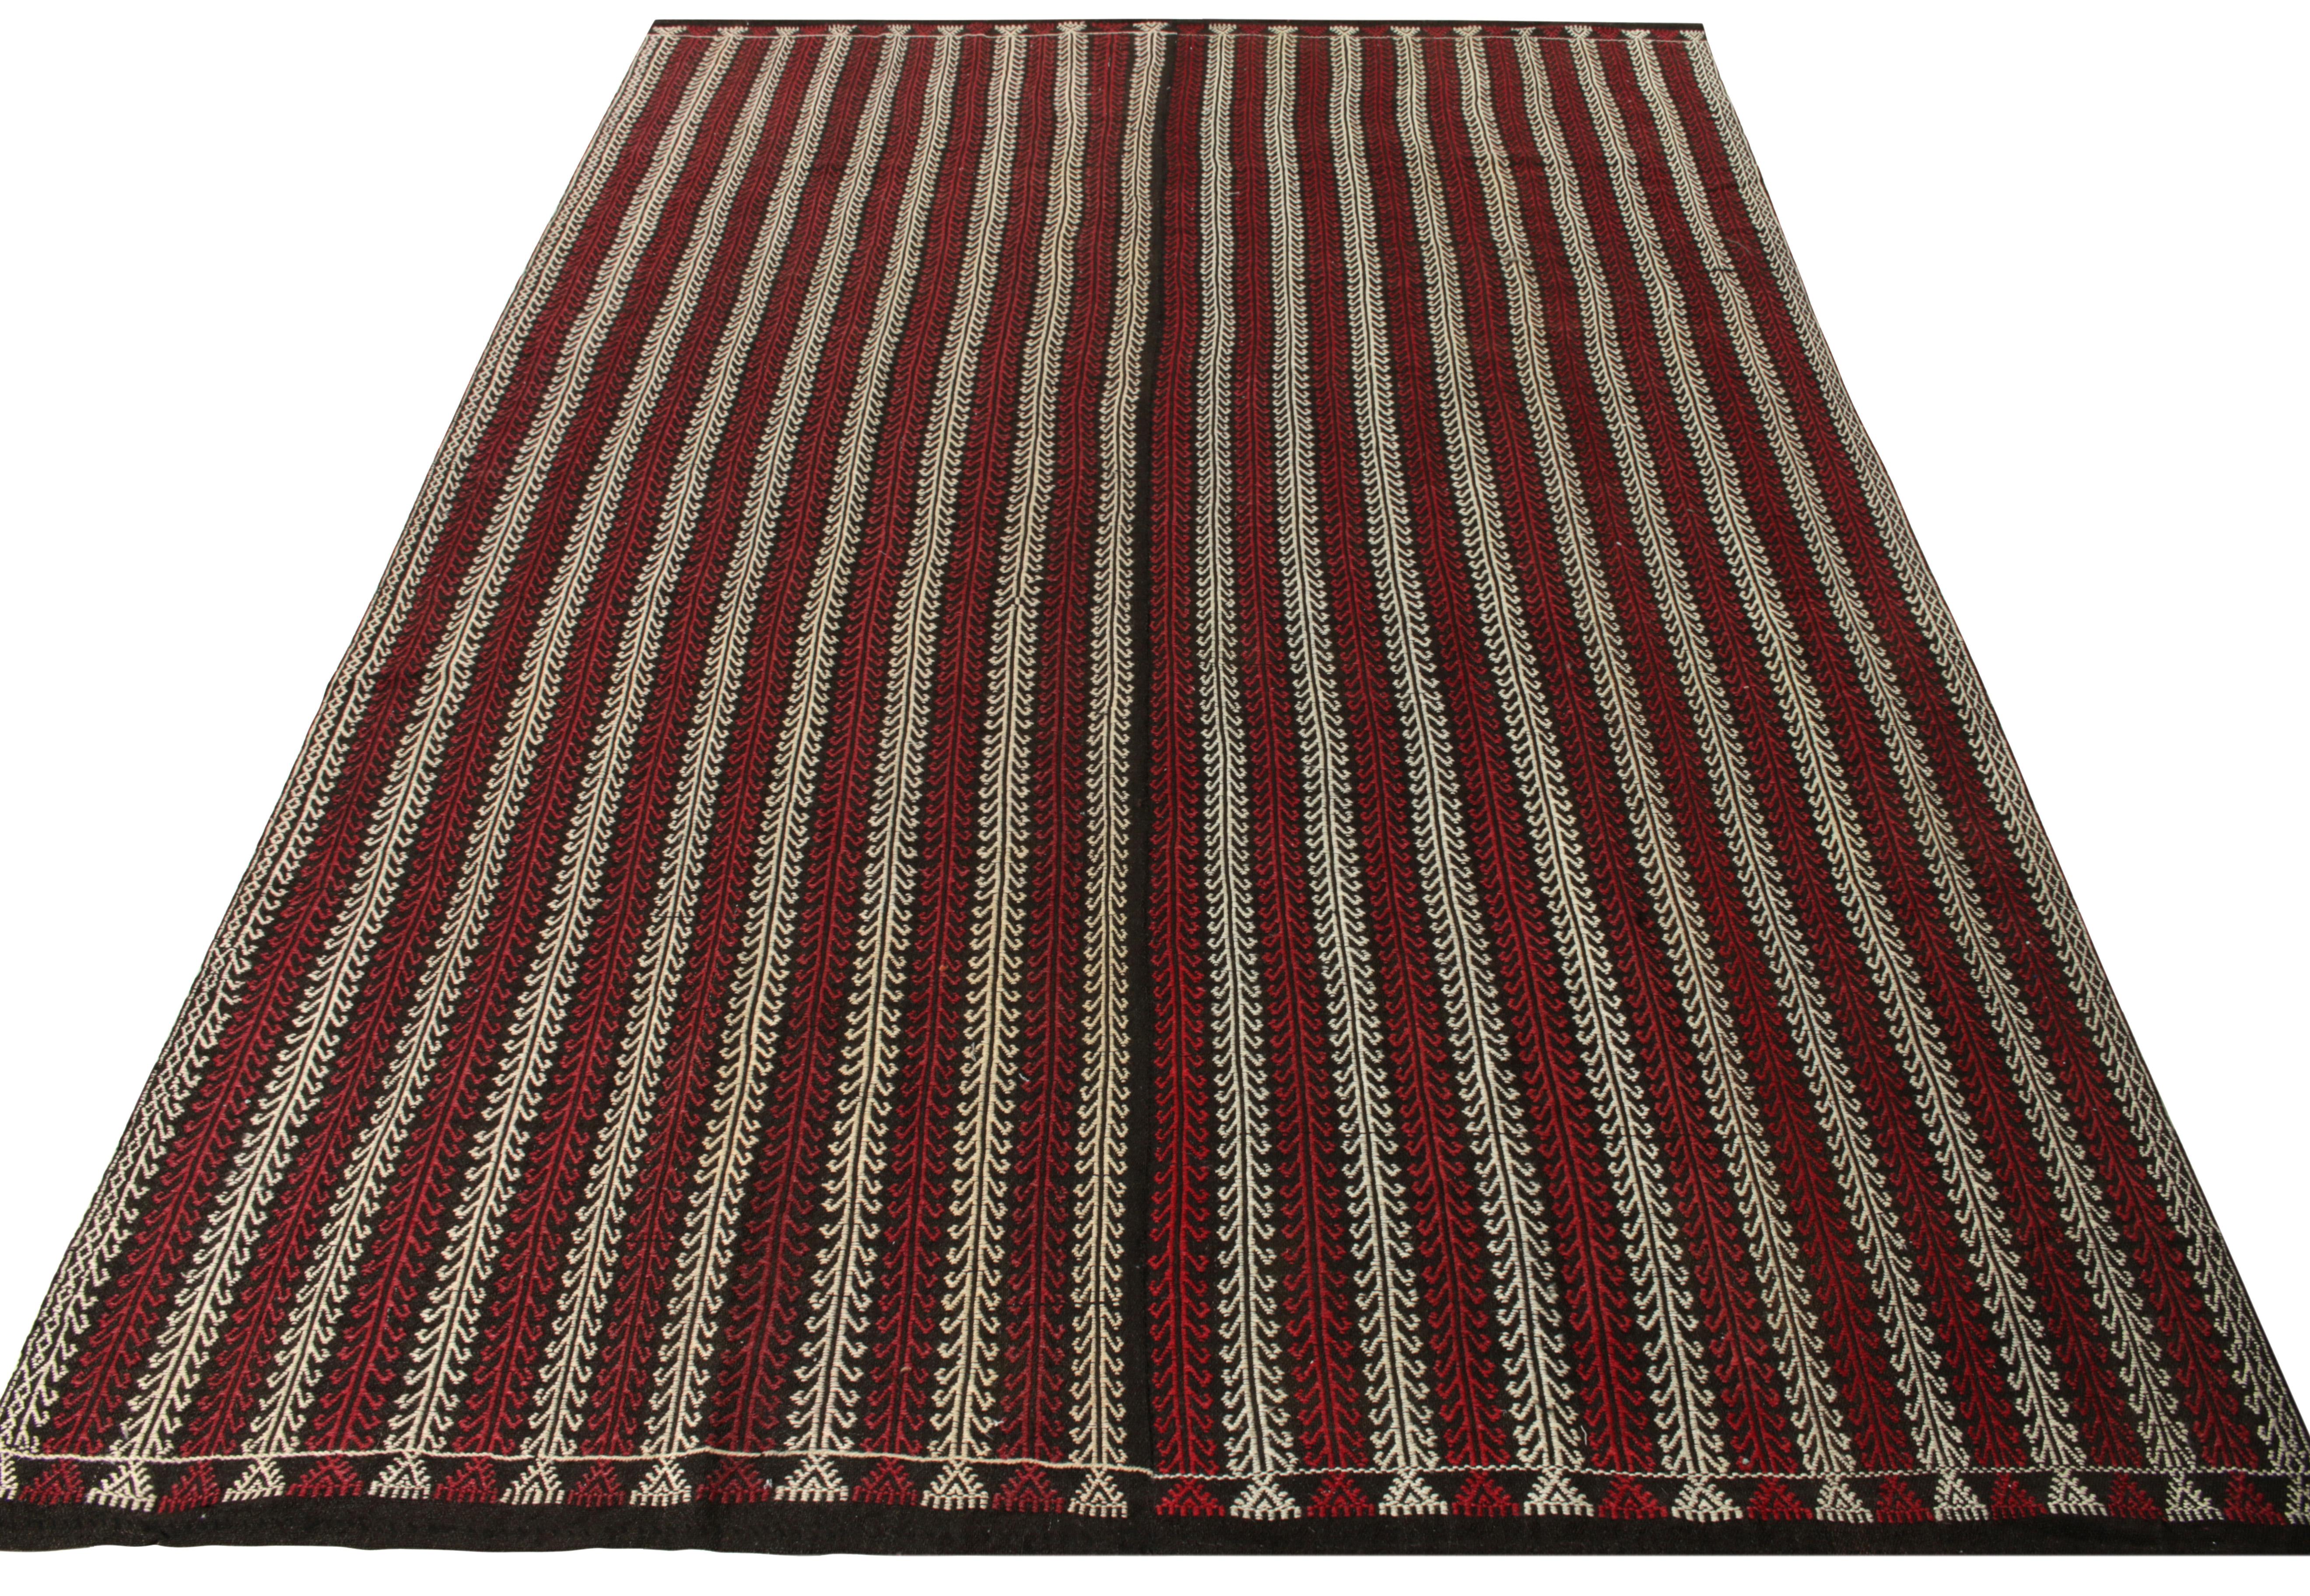 Hailing from Turkey circa 1950-1960, a mature vintage kilim rug enjoying a symmetric geometric pattern branching symmetrically for a strong sense of movement - highlighted with rich red and white on a charcoal black scale. Enigmatic yet elegant, a